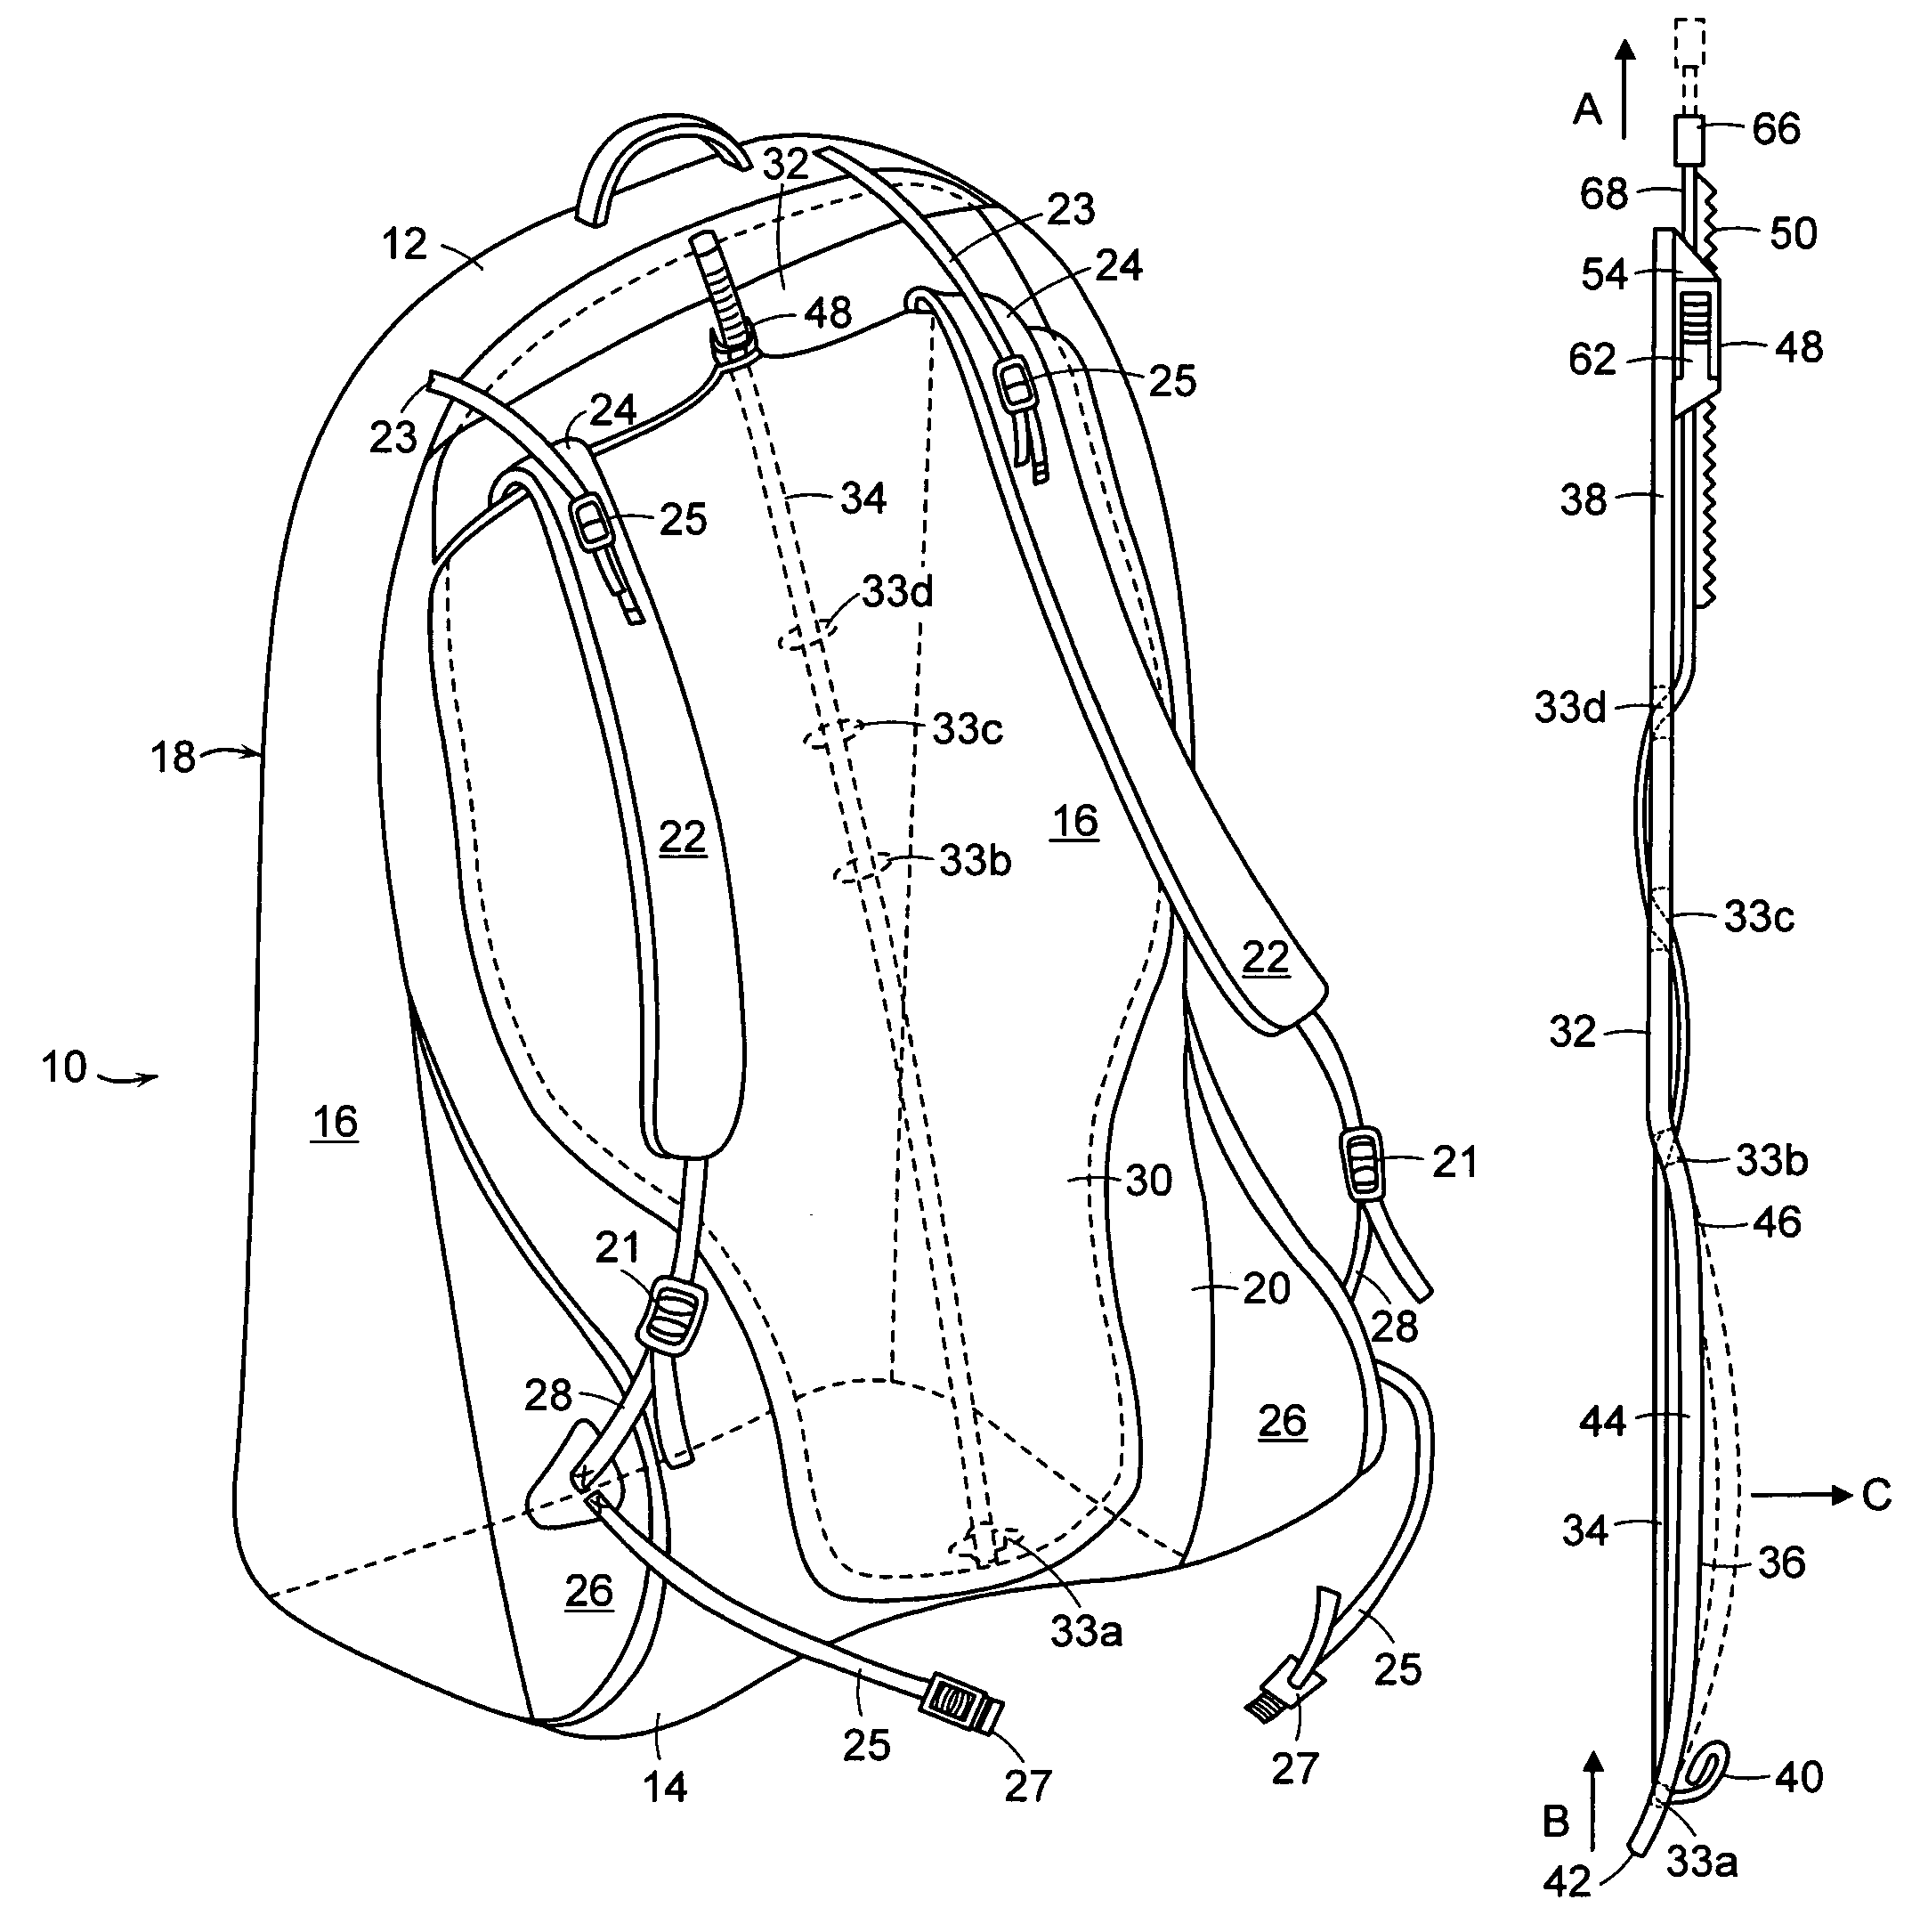 Backpack with lumbar support plate